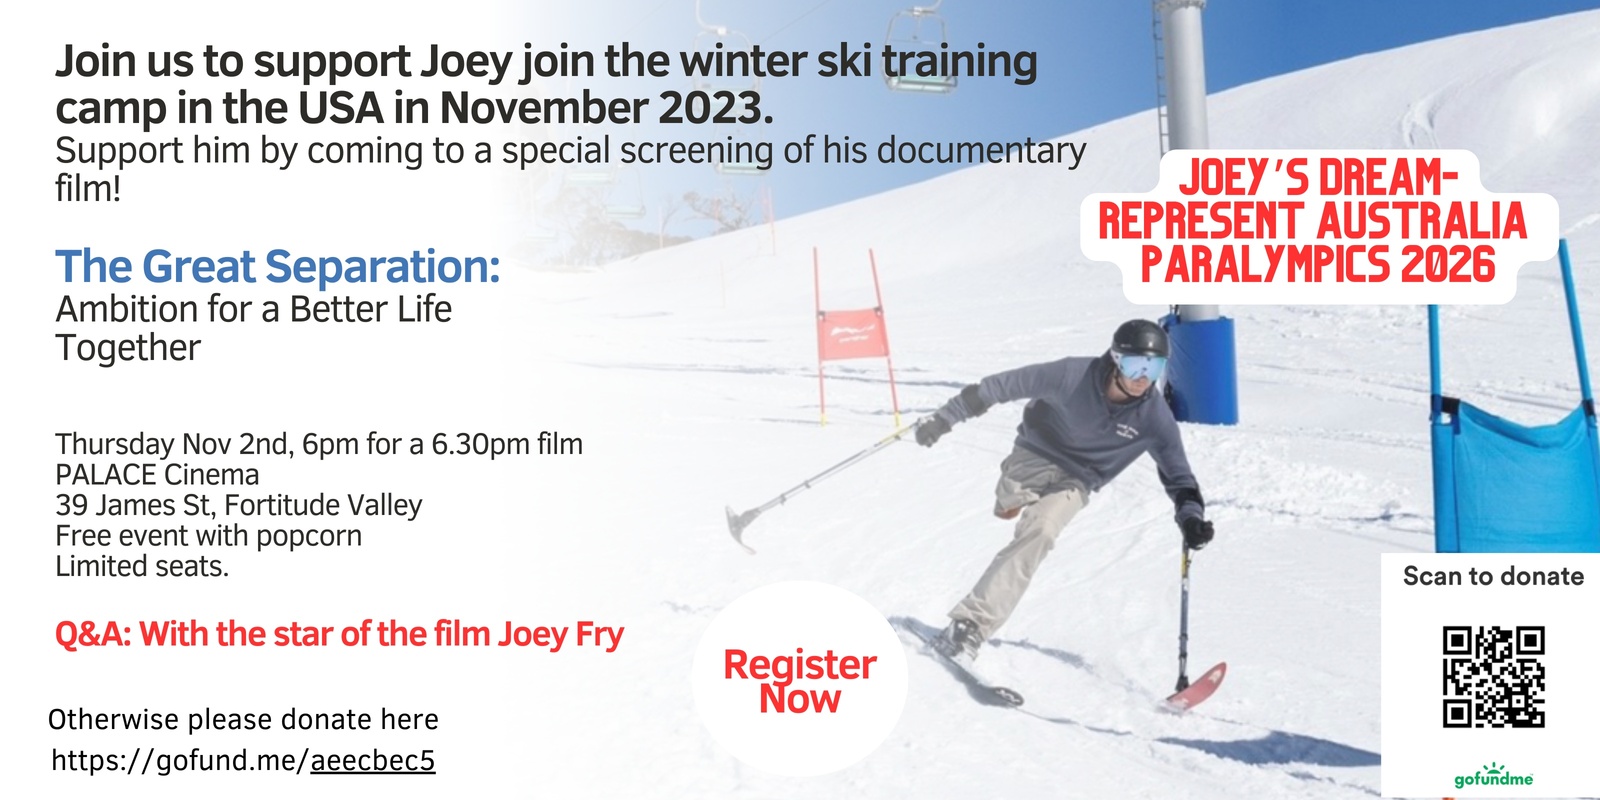 Banner image for Empower Joey's Australian Paralympics Dream: Step 1 Train with the Winter Ski Training Camp in USA November 2023.